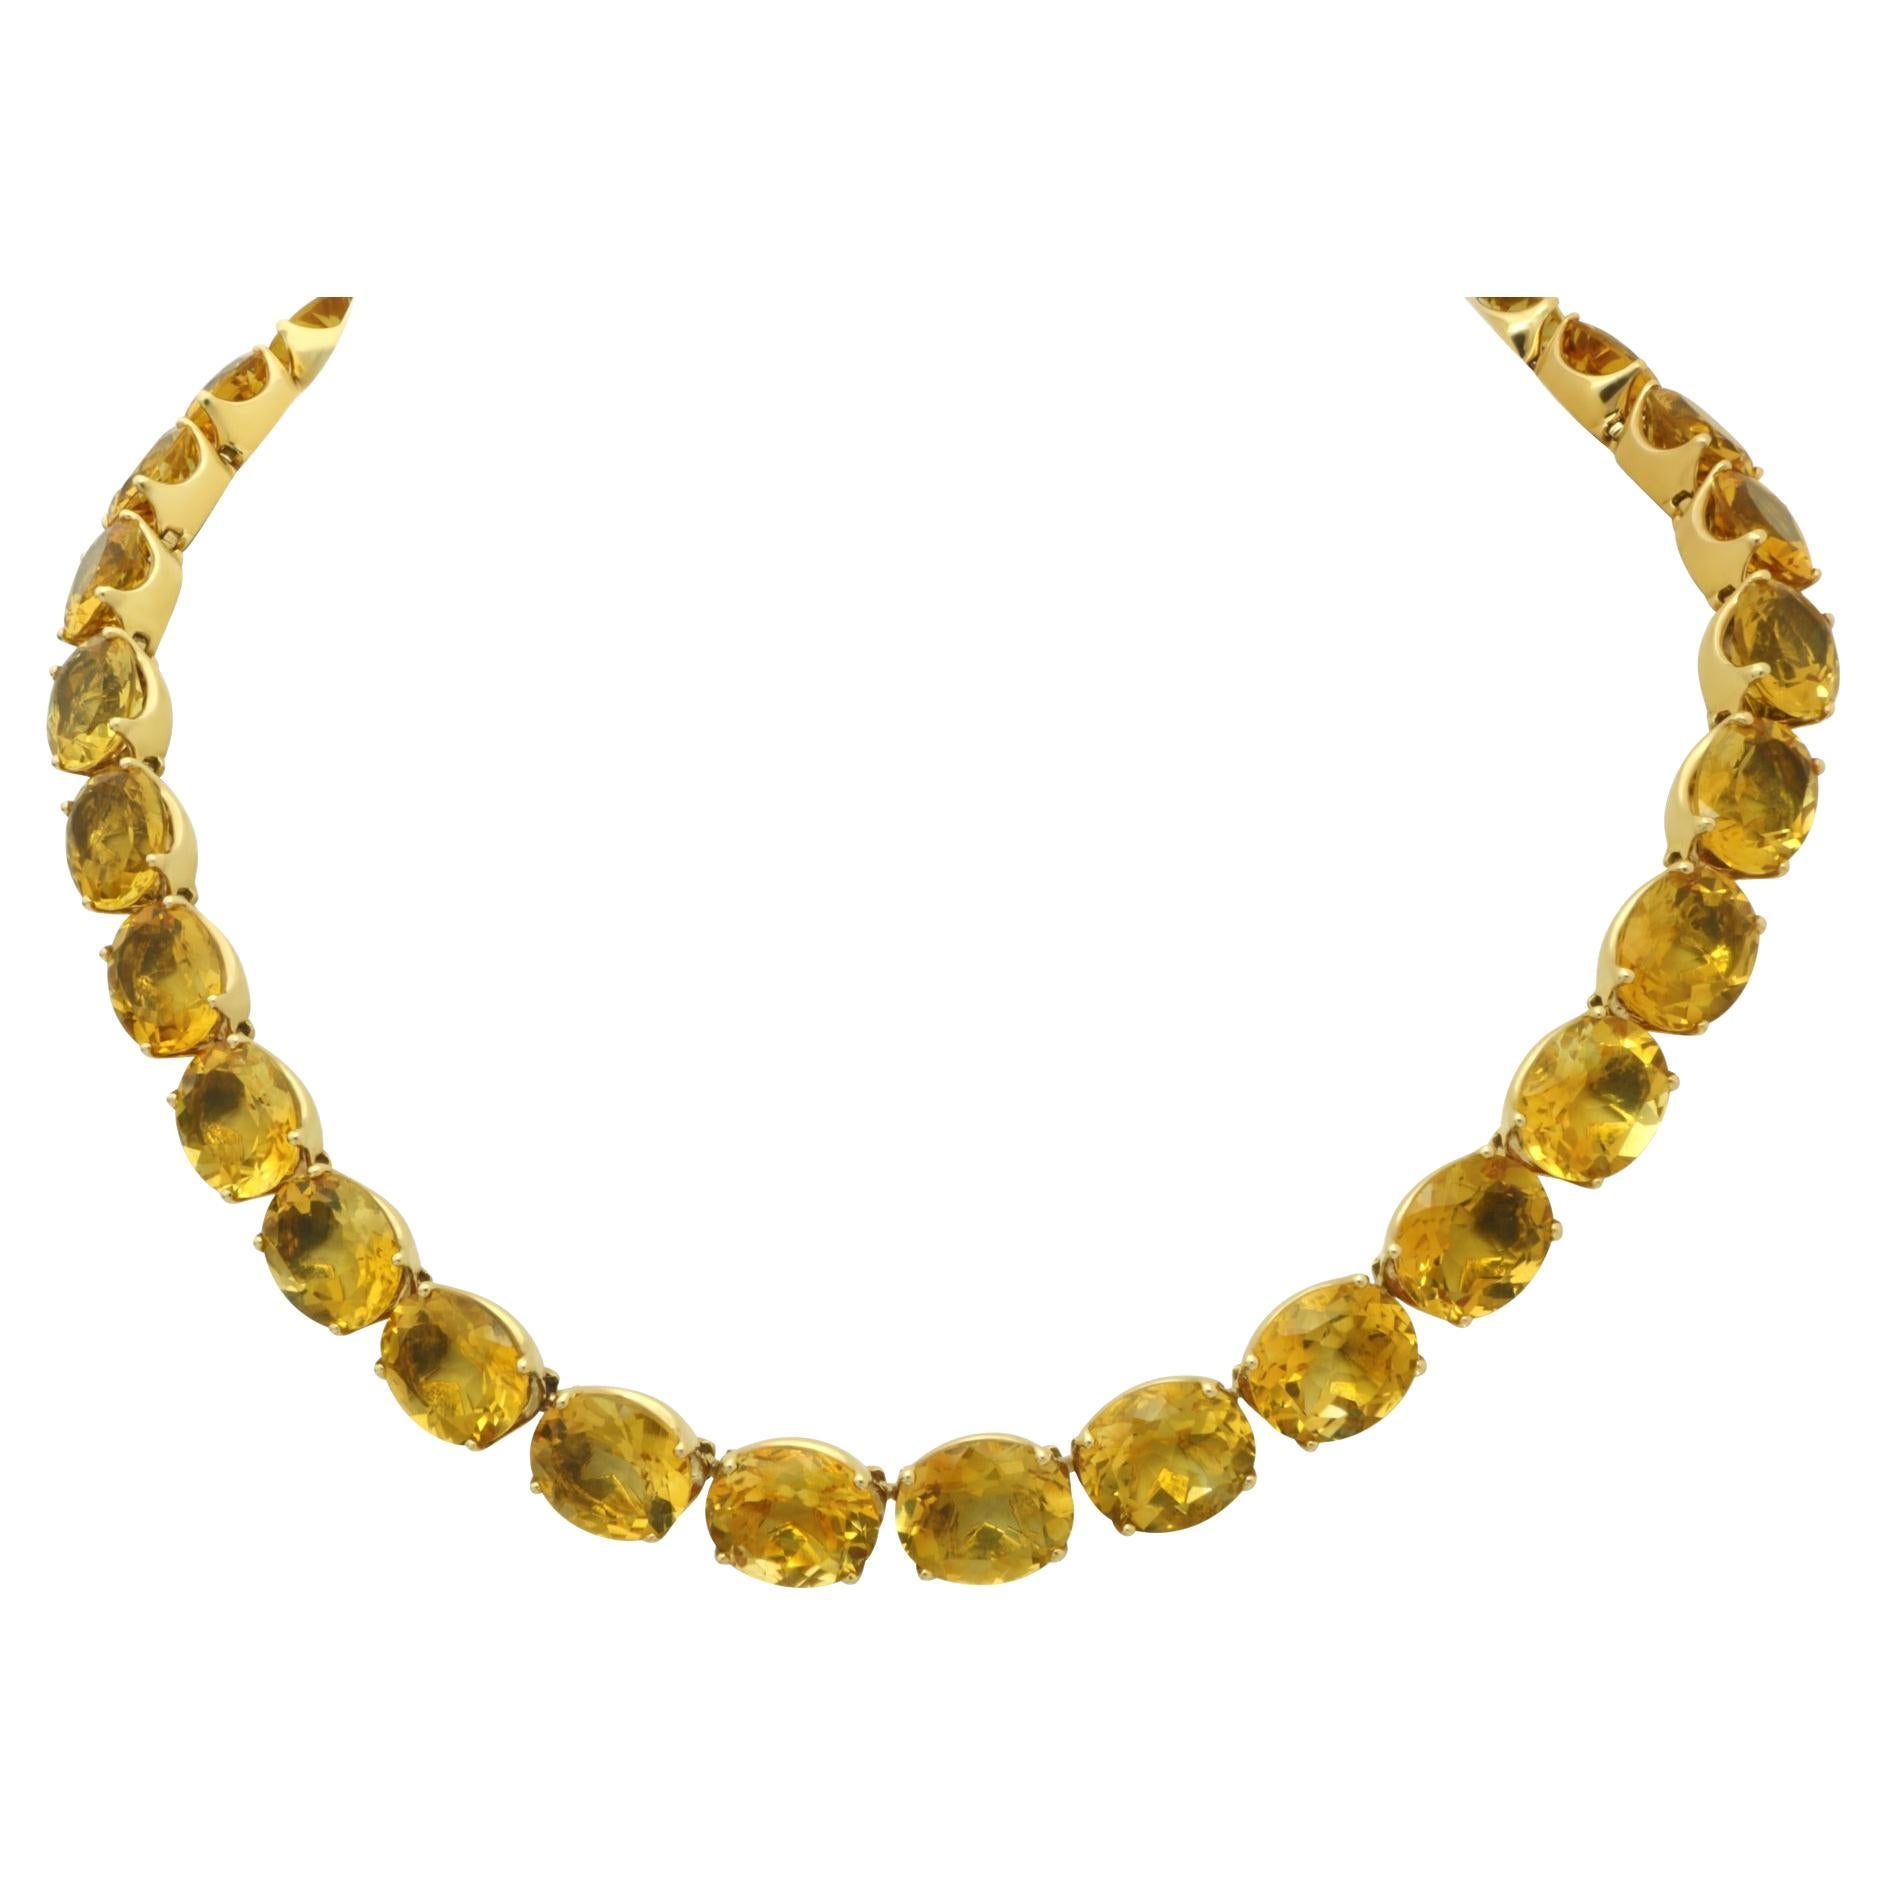 Jay Feder Vintage 137.7ct Oval Citrine 18k Yellow Gold Tennis Necklace For Sale